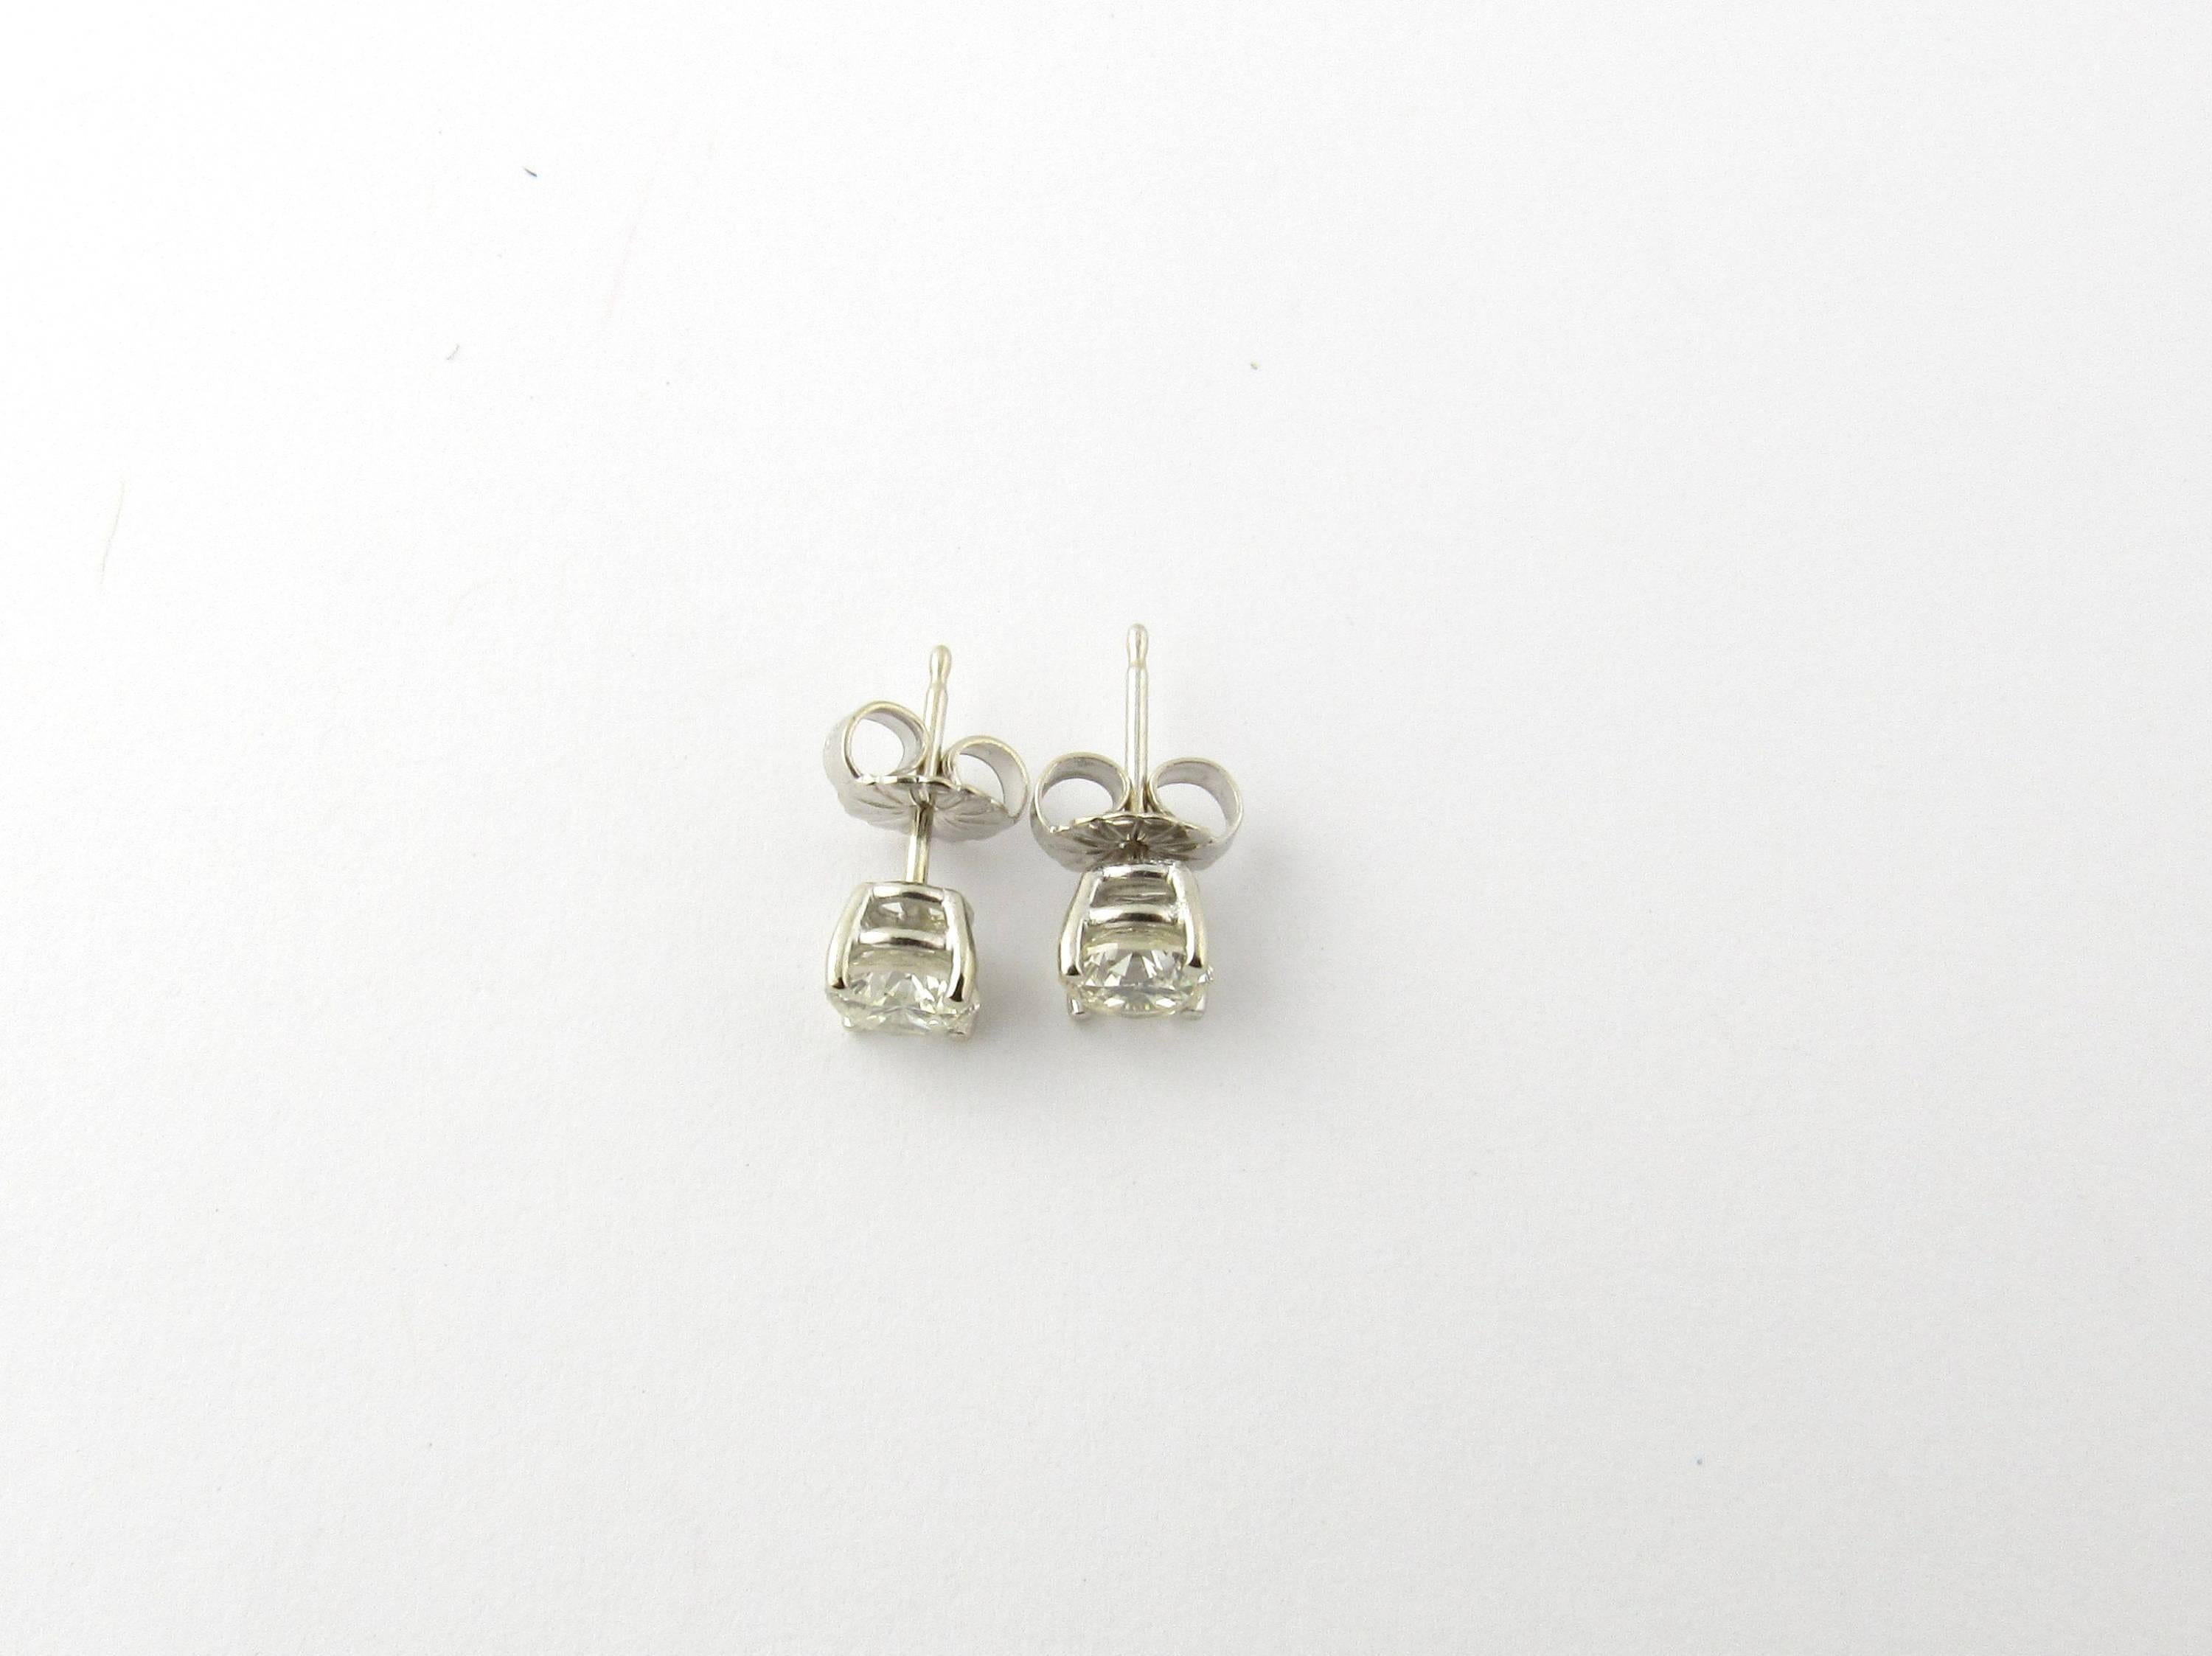 Vintage 14K White Gold Round Brilliant Diamond Stud Earrings .90 cts

These beautiful diamonds studs are set in 4 prongs of white gold.

Diamonds are approx. .44 and .46 carats each.

SI1 clarity, K color.

Approx. 13 mm from front to back

Marked